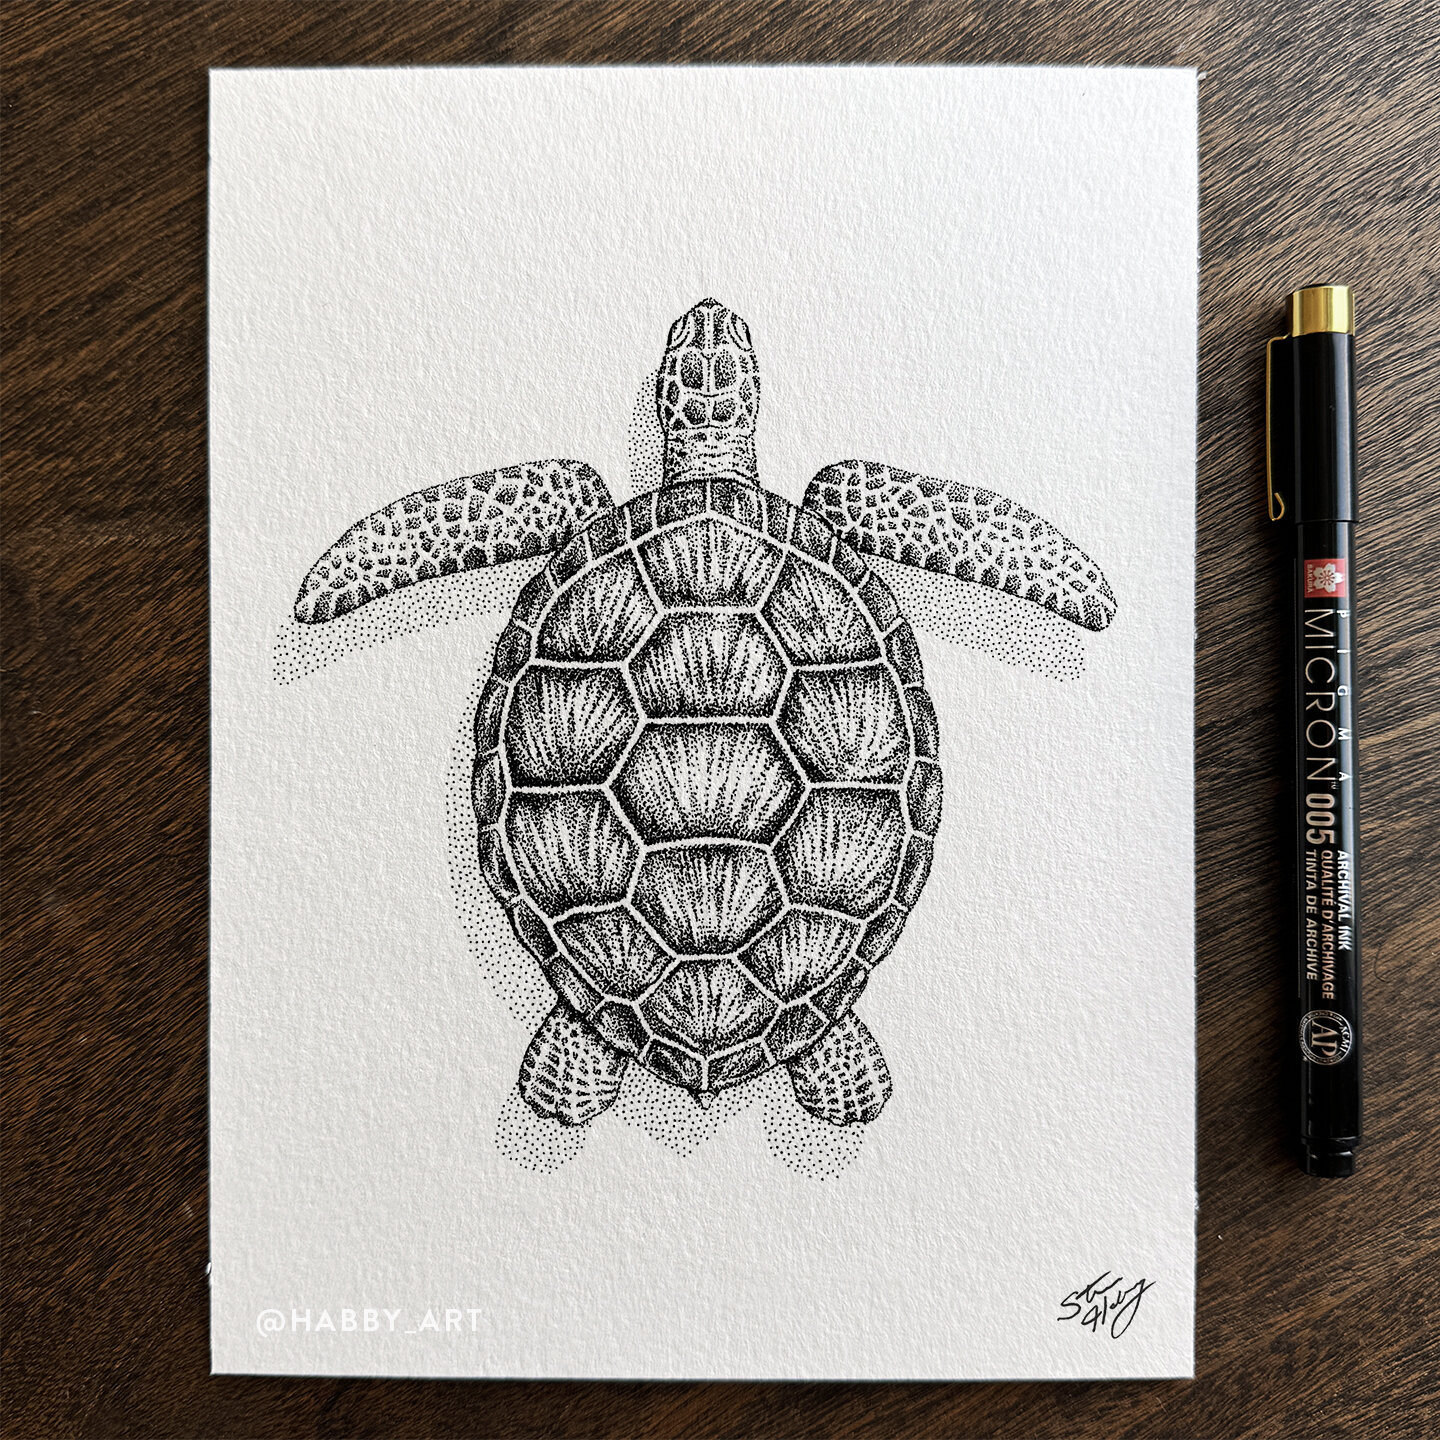 &ldquo;Sea Turtle&rdquo; &bull; Another drawing from my swimming in the shallows series. I got lost in the details on this one. The patterning of the shell was such a challenge to create with dots. You can swipe to see an ultra close up of the stippl